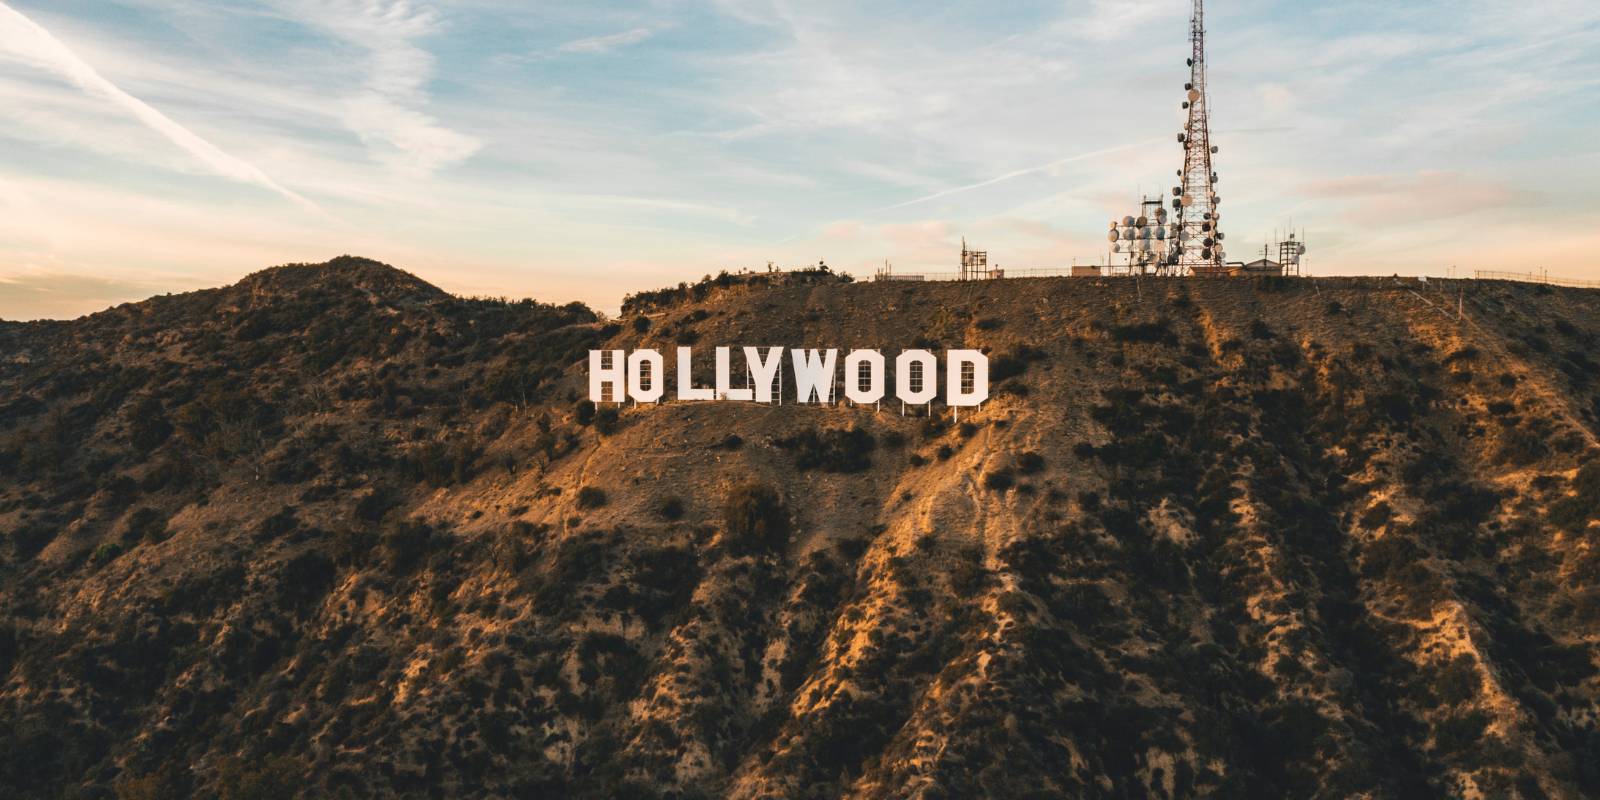 October 4th: How Real Estate Advertisers Created “Hollywood”